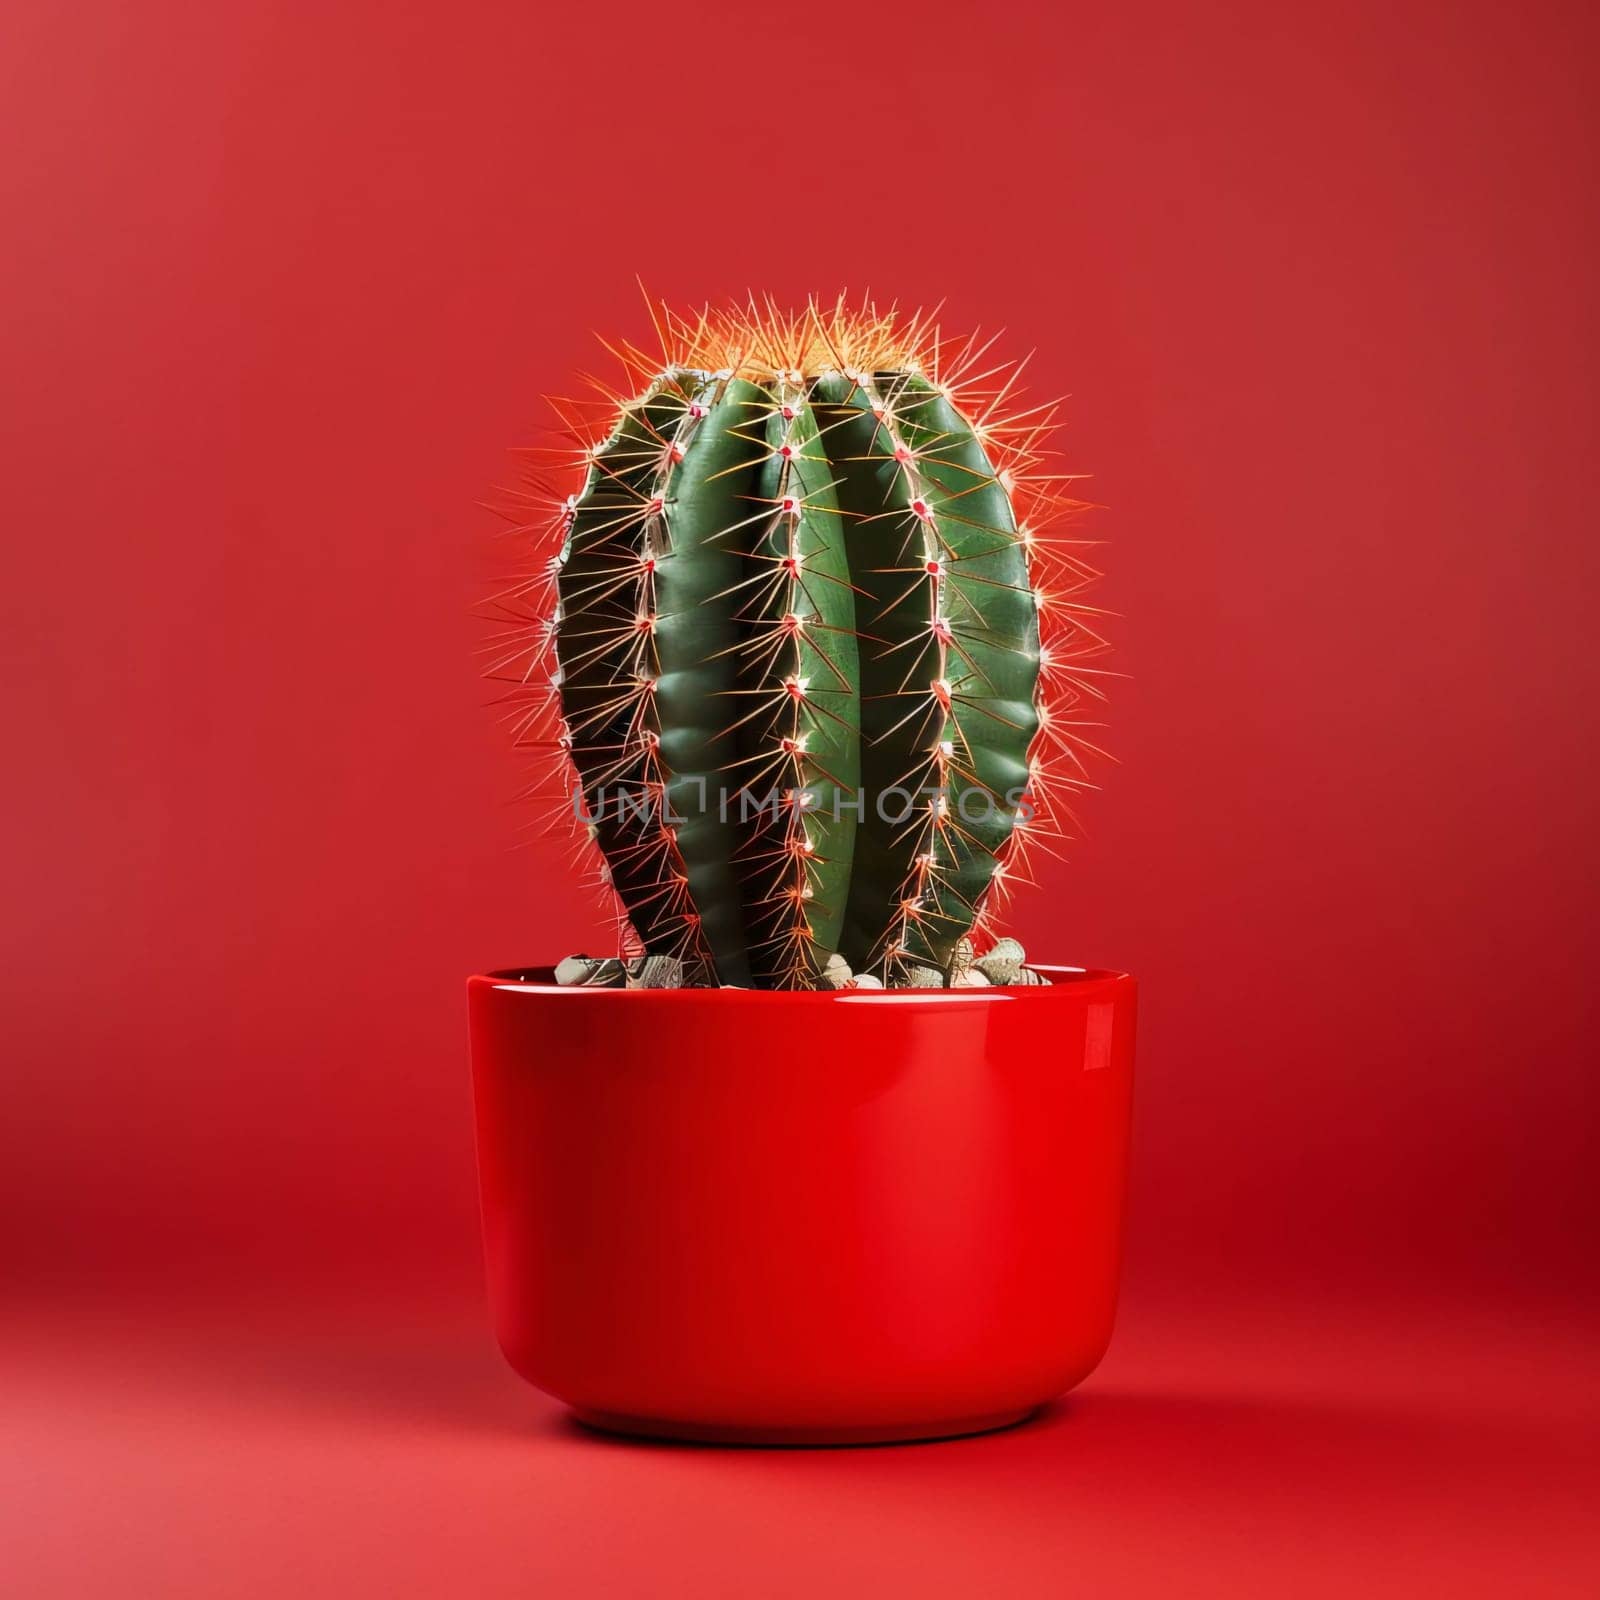 Plant called Cactus: Cactus in a pot on a red background. 3d rendering